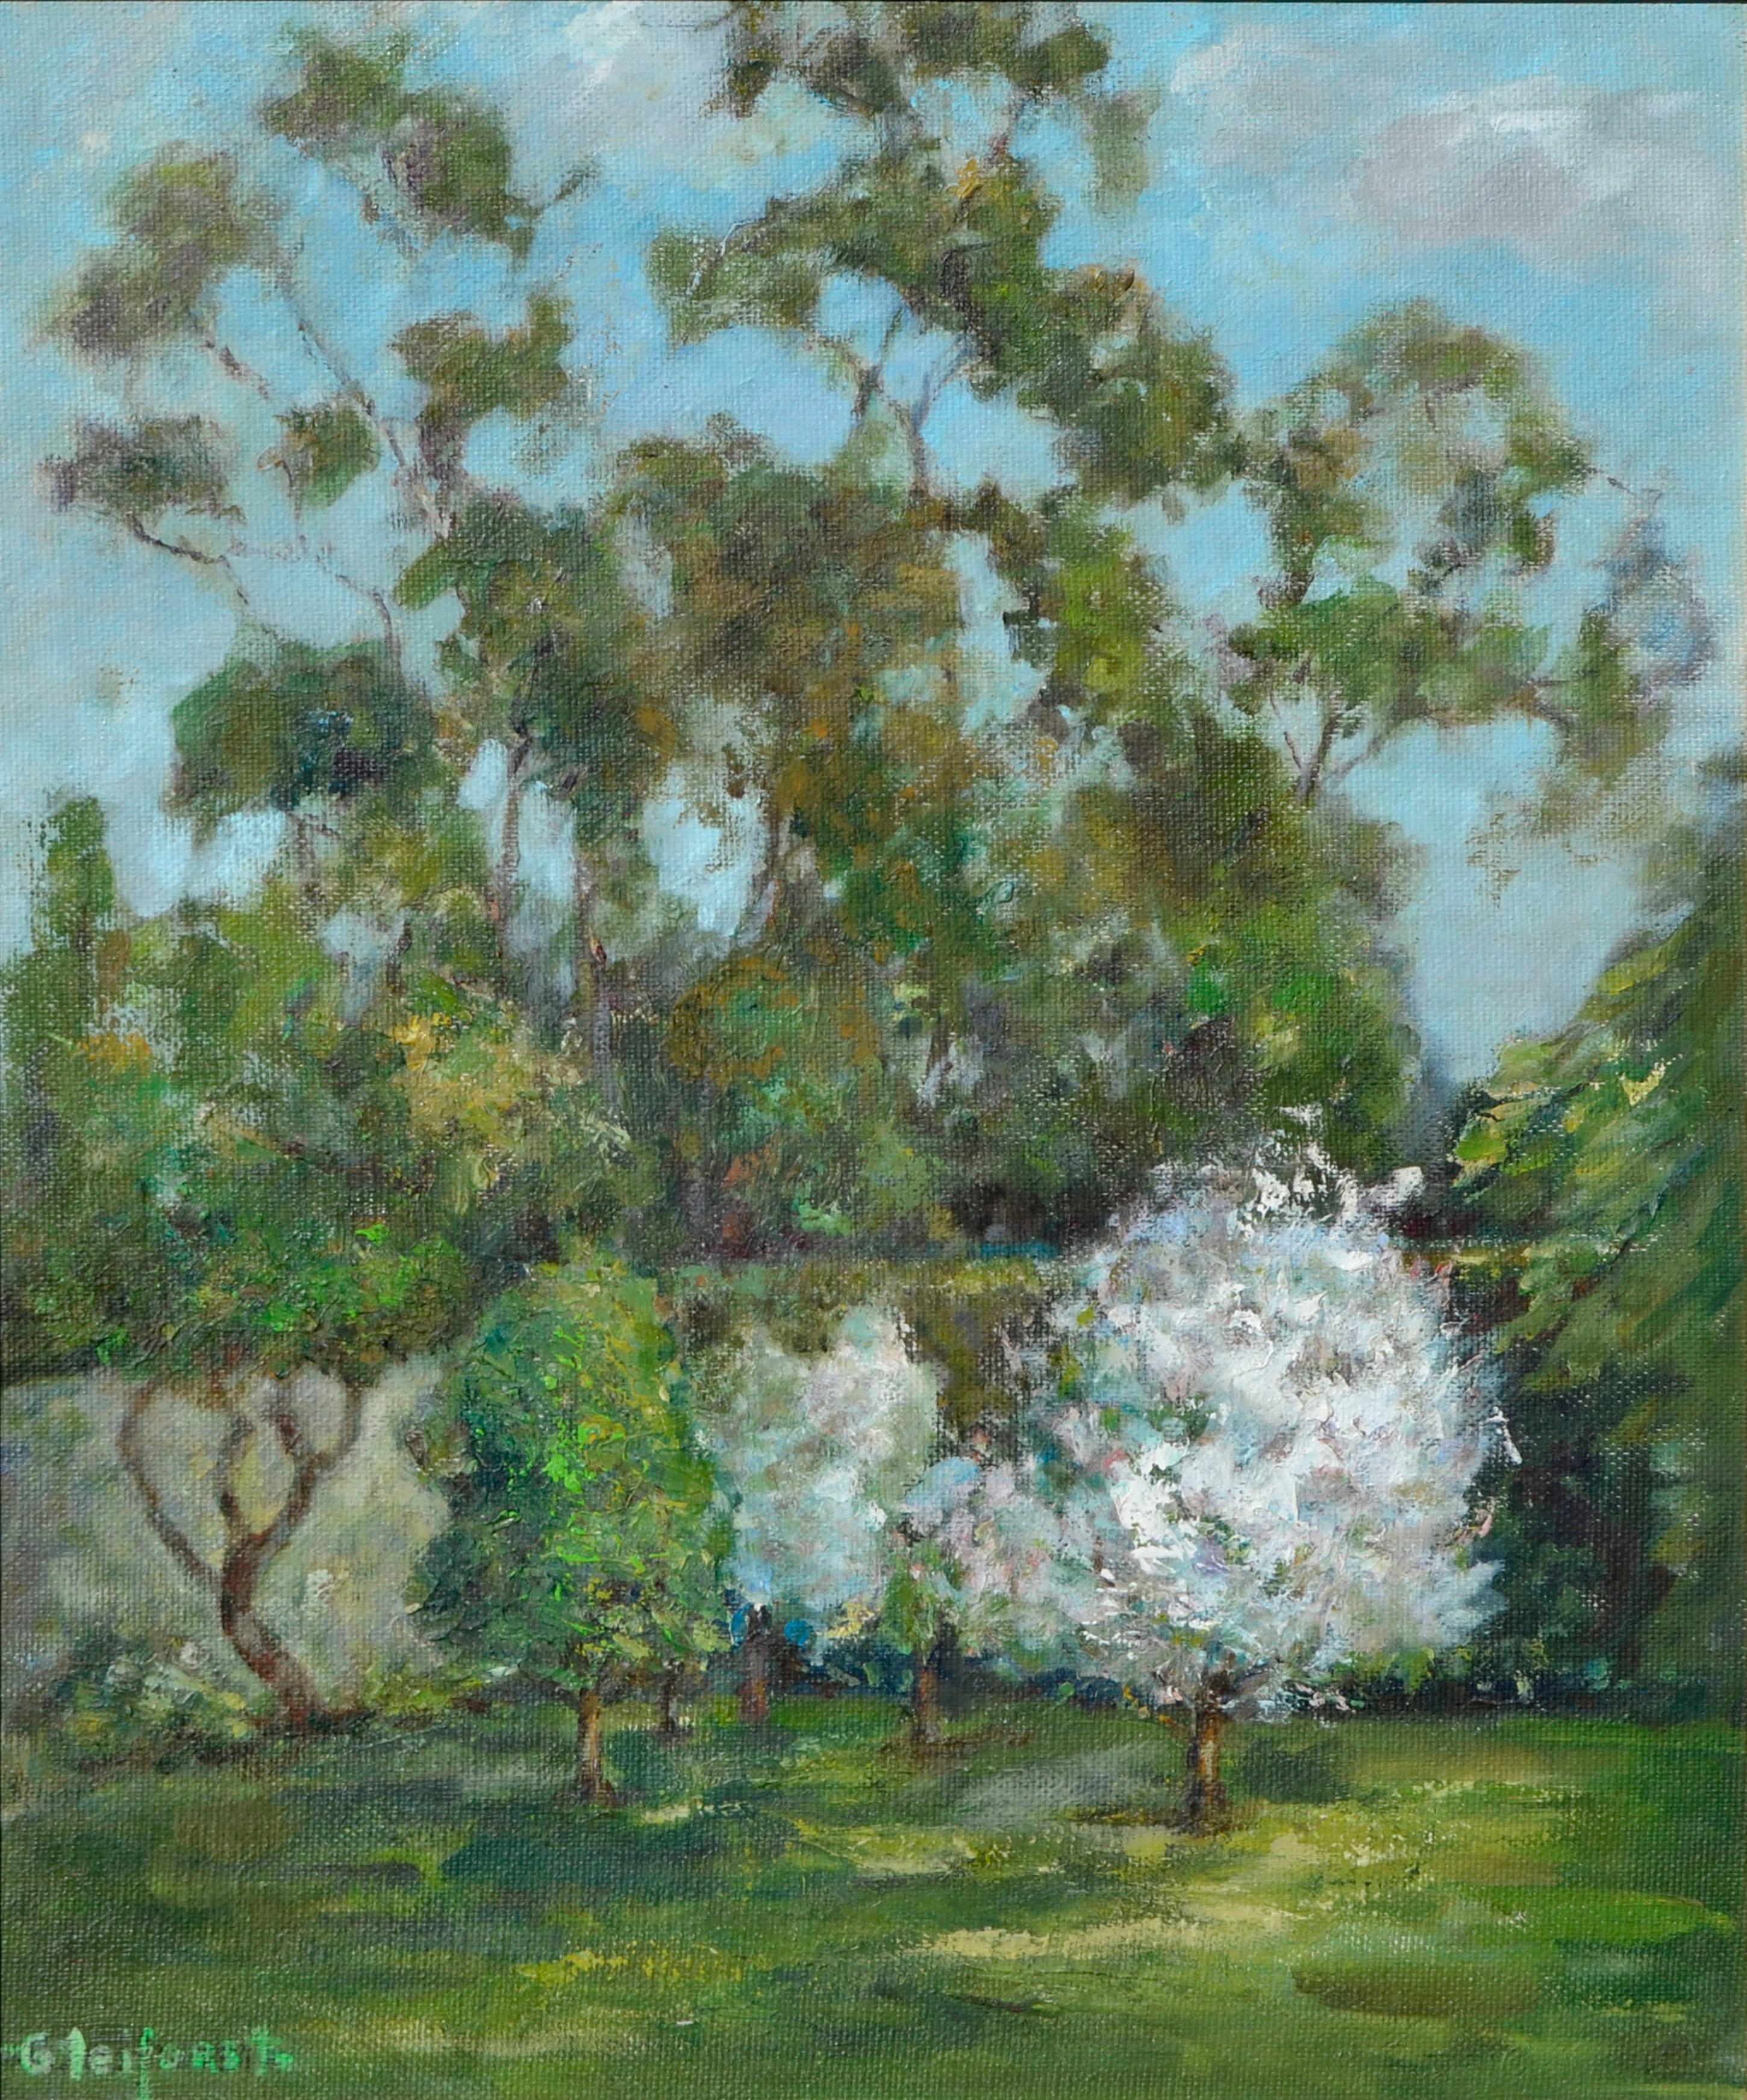 Trees in Spring - Painting by Helen Enoch Gleiforst